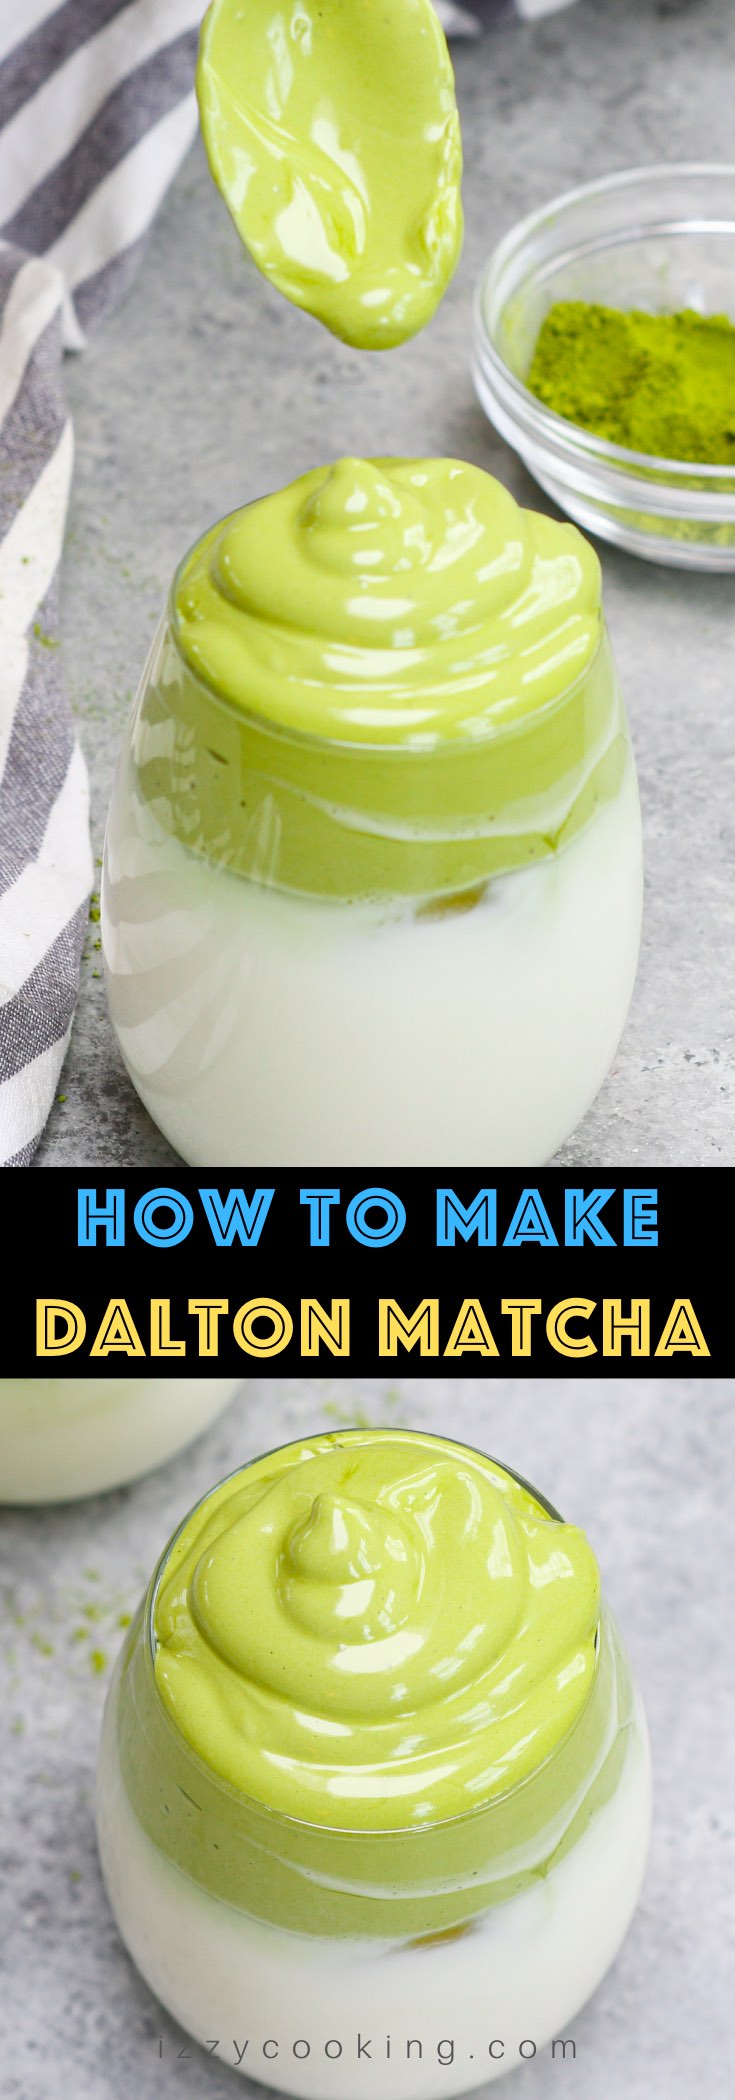 Dalgona Matcha is a trendy drink that’s sweet, fluffy and creamy! Topped with beautiful green tea matcha foam, this whipped matcha latte is taking social media by storm right now. It’s only 4 ingredients and takes about 5 minutes with a hand mixer! You can make it with or without eggs! 